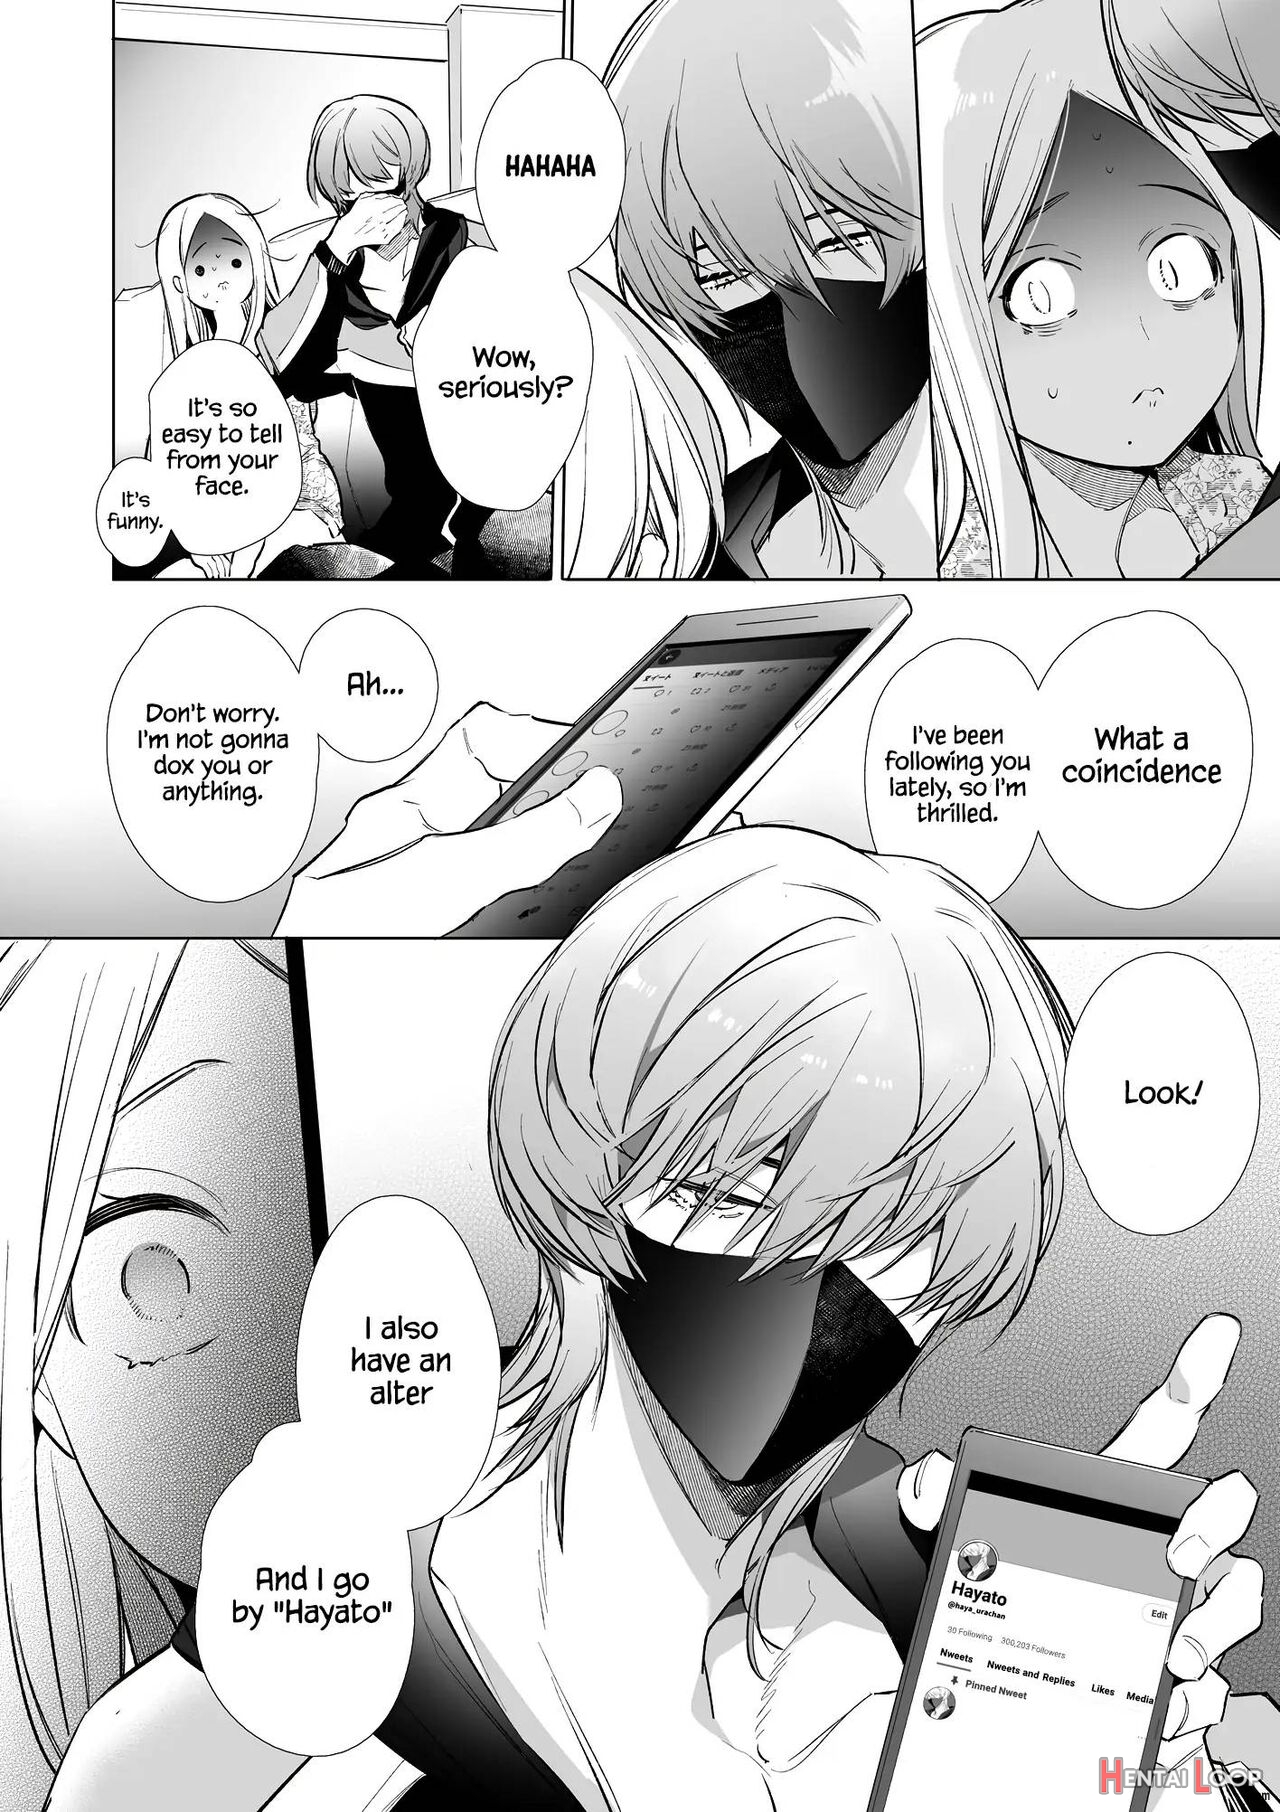 Kana-san Ntr ~ Degradation Of A Housewife By A Guy In An Alter Account ~ page 19